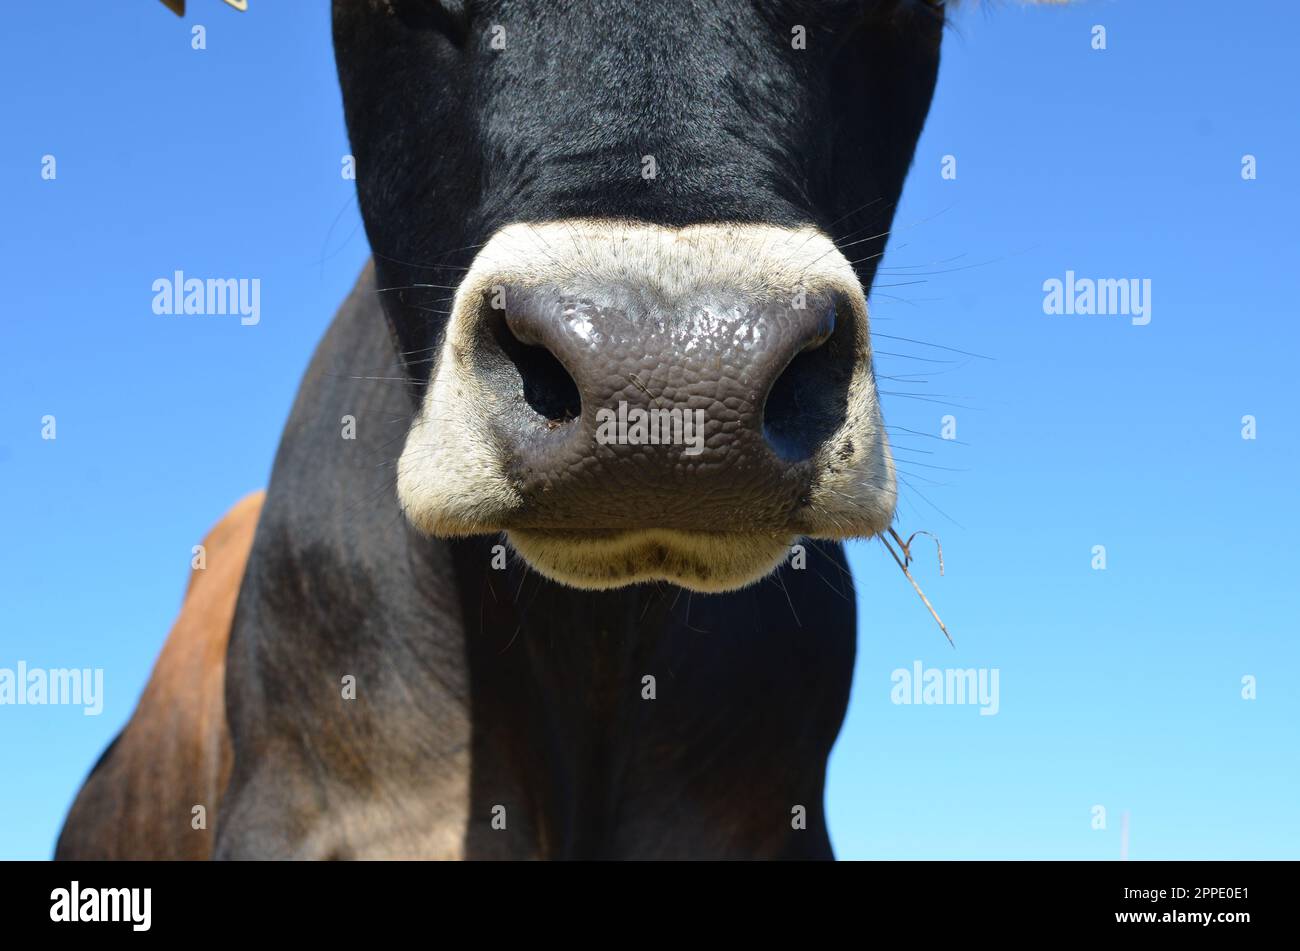 Abstract Closeup Of A Purebred Jersey Bull's Nose. Stock Photo